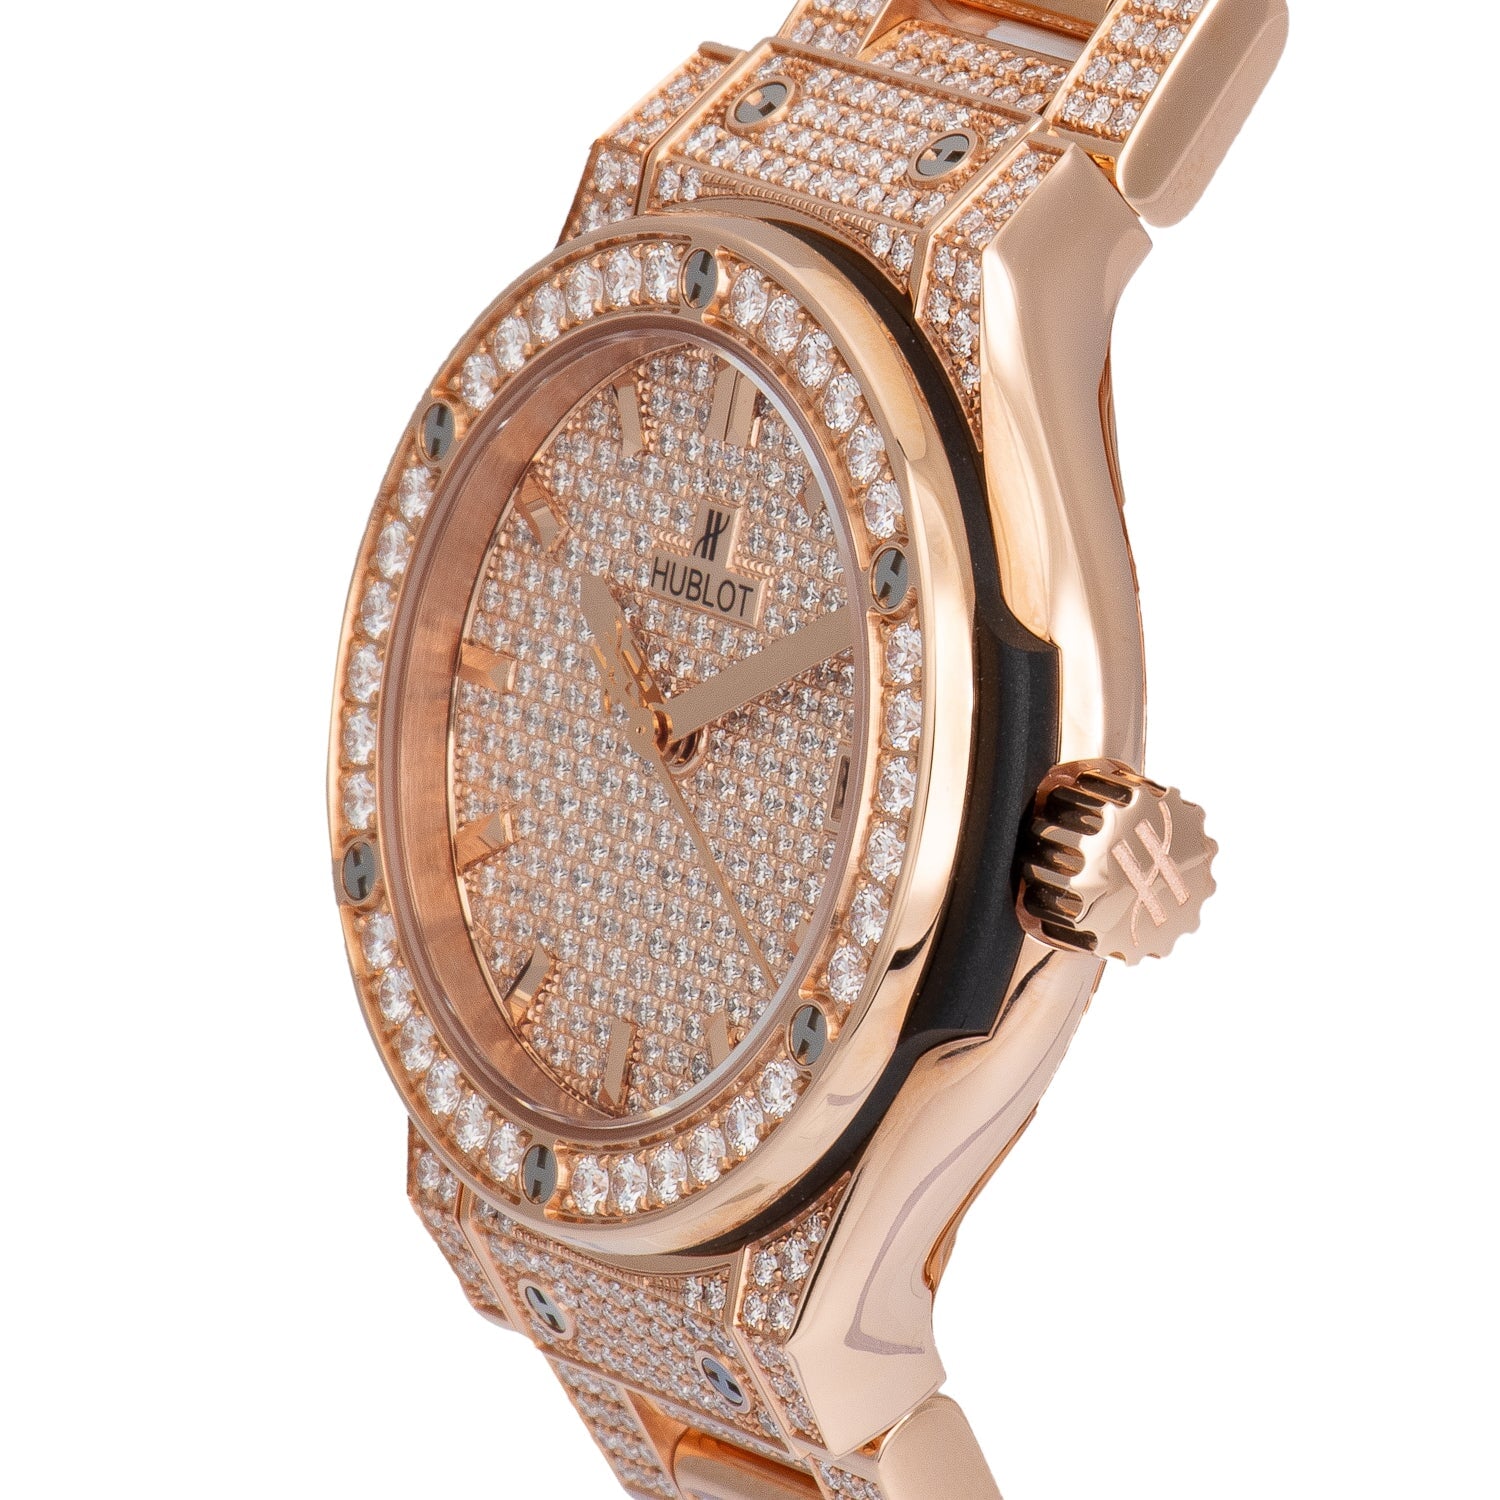 In Excess: Diamond Watches